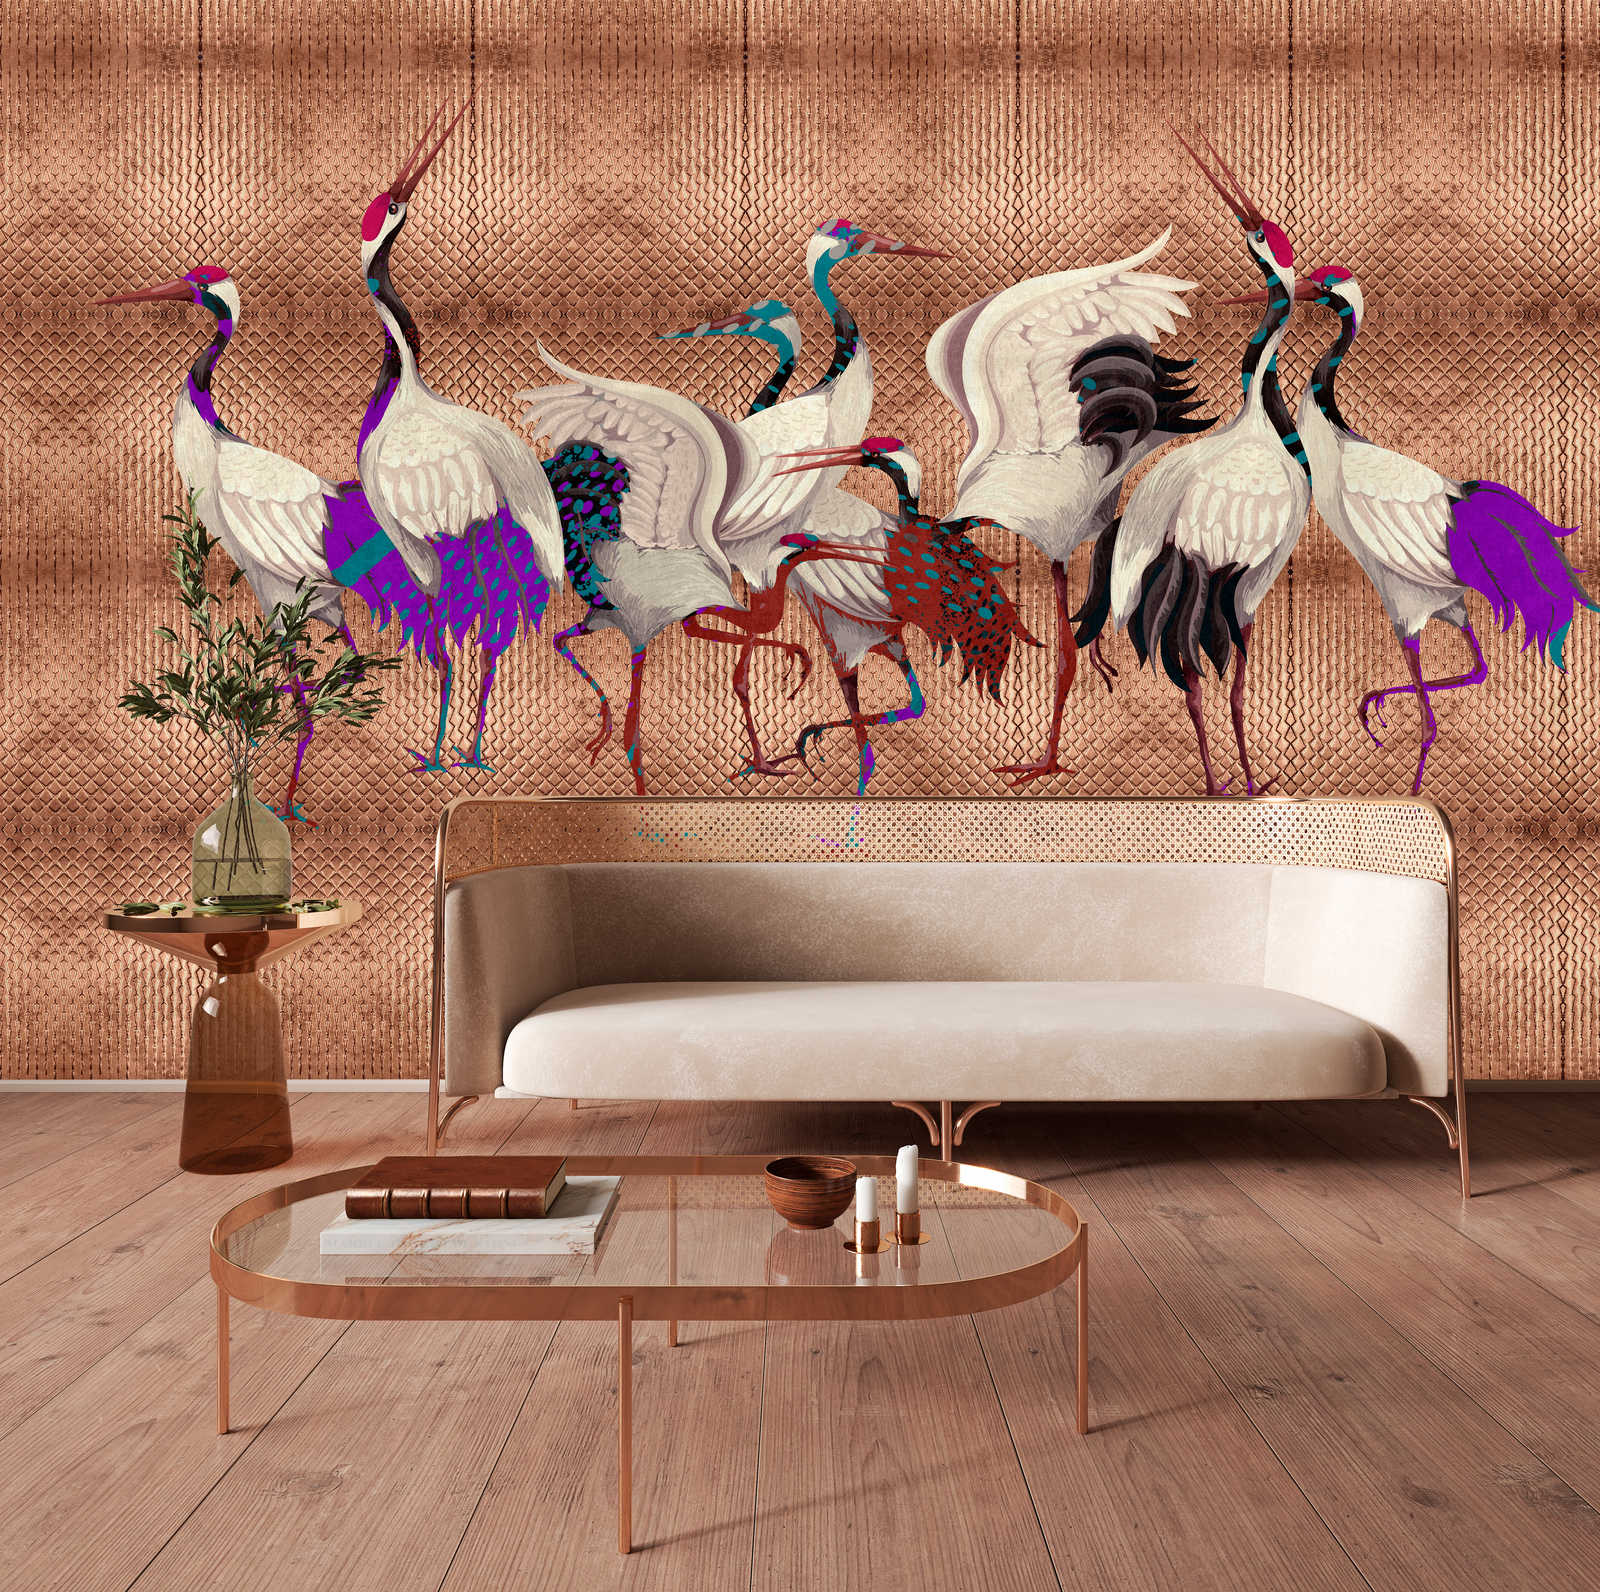             Land of Happiness 2 - Metallic copper wall mural with colourful crane motif
        